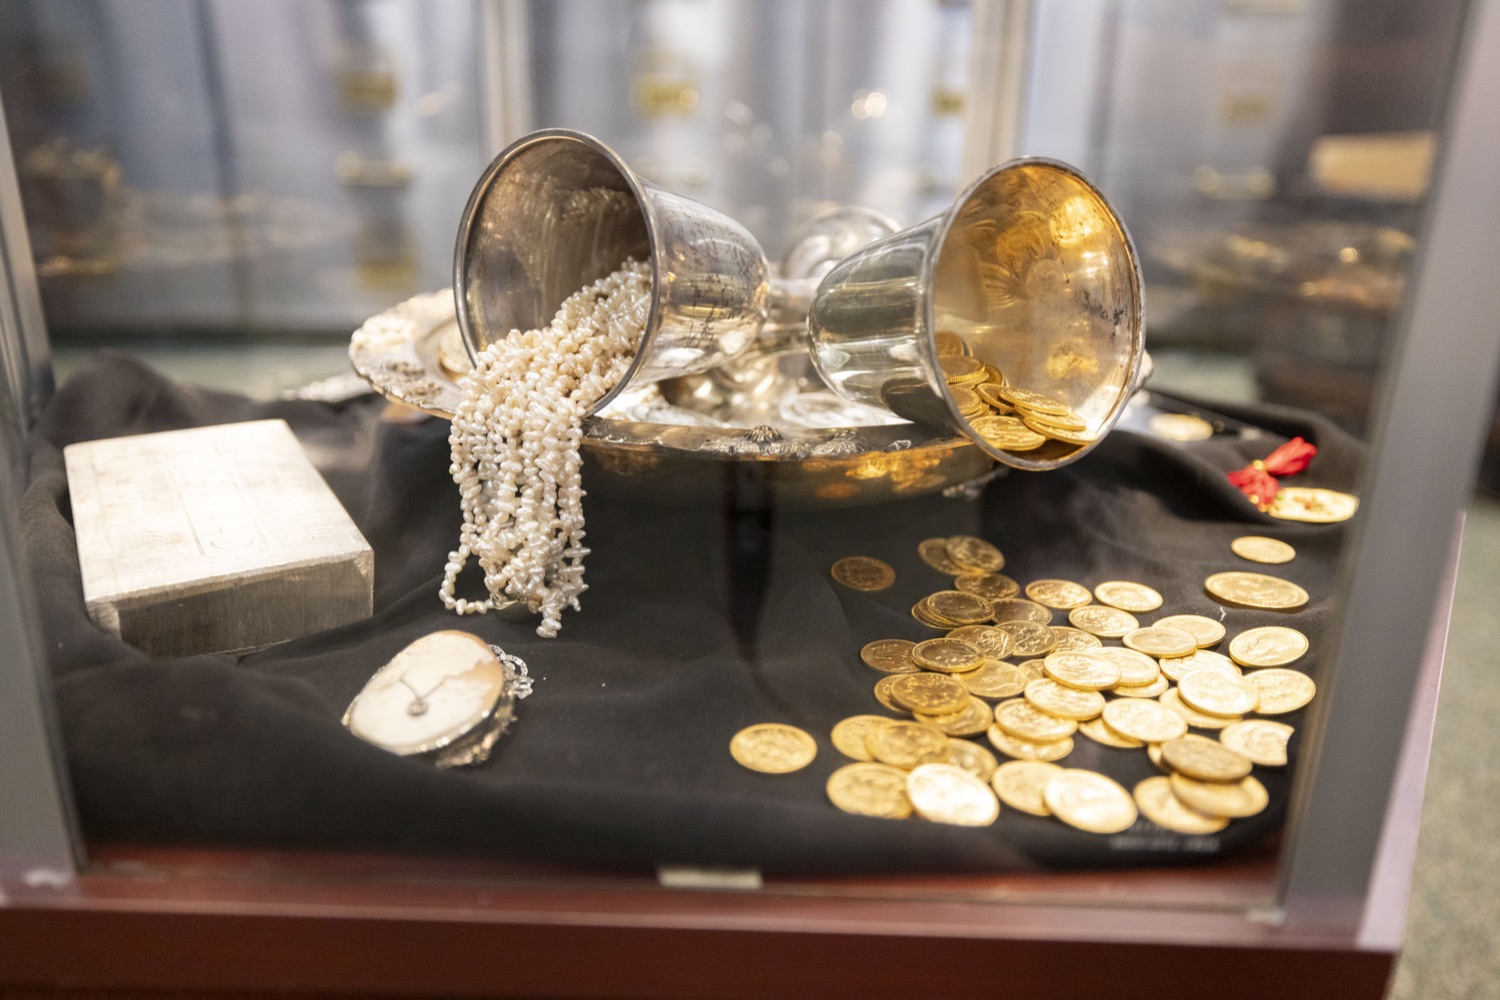 Treasurer Stacy Garrity gives a tour of the historic vault, showing examples of tangible property including military decorations, fine jewelry, antique silver, musical instruments, and other items, in Harrisburg, PA on July 20, 2023.<br><a href="https://filesource.amperwave.net/commonwealthofpa/photo/23247_treas_vault_cz_17.jpg" target="_blank">⇣ Download Photo</a>